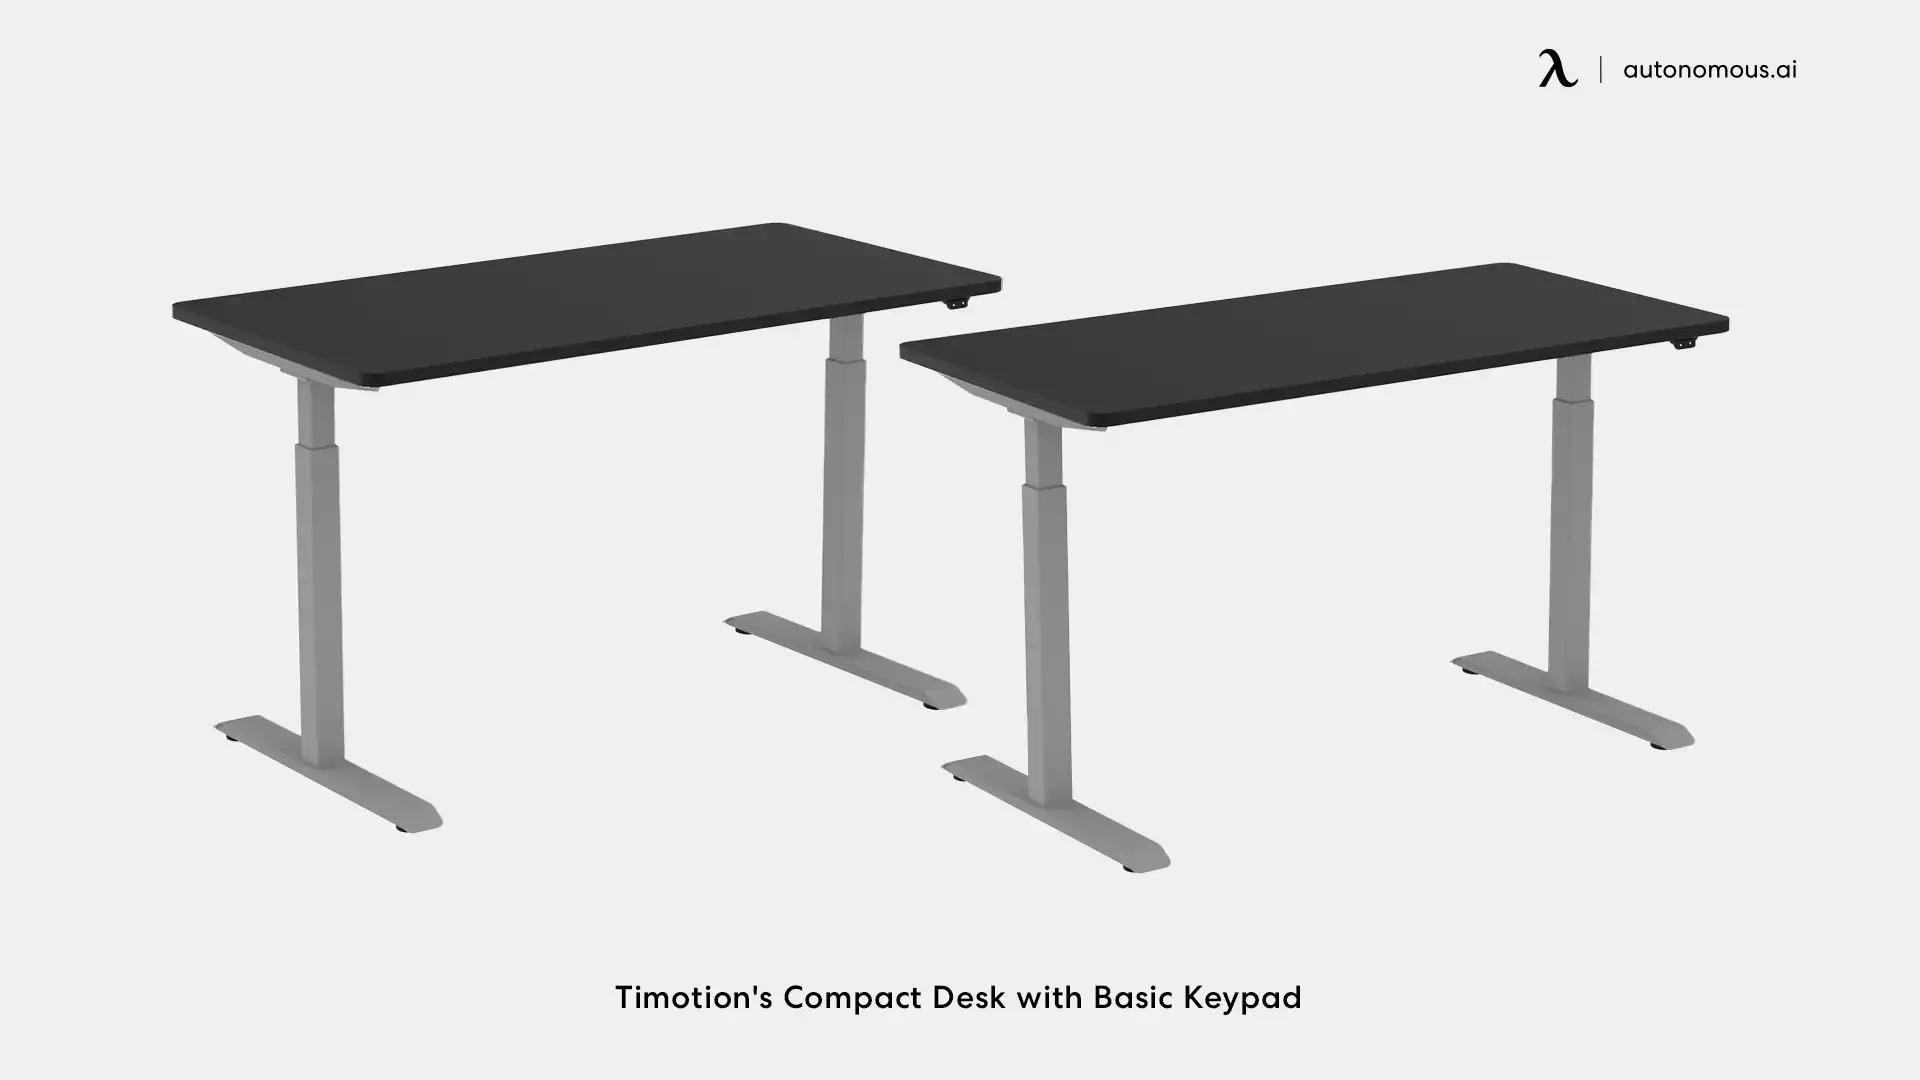 Compact Desk by Timotion: Basic Keypad